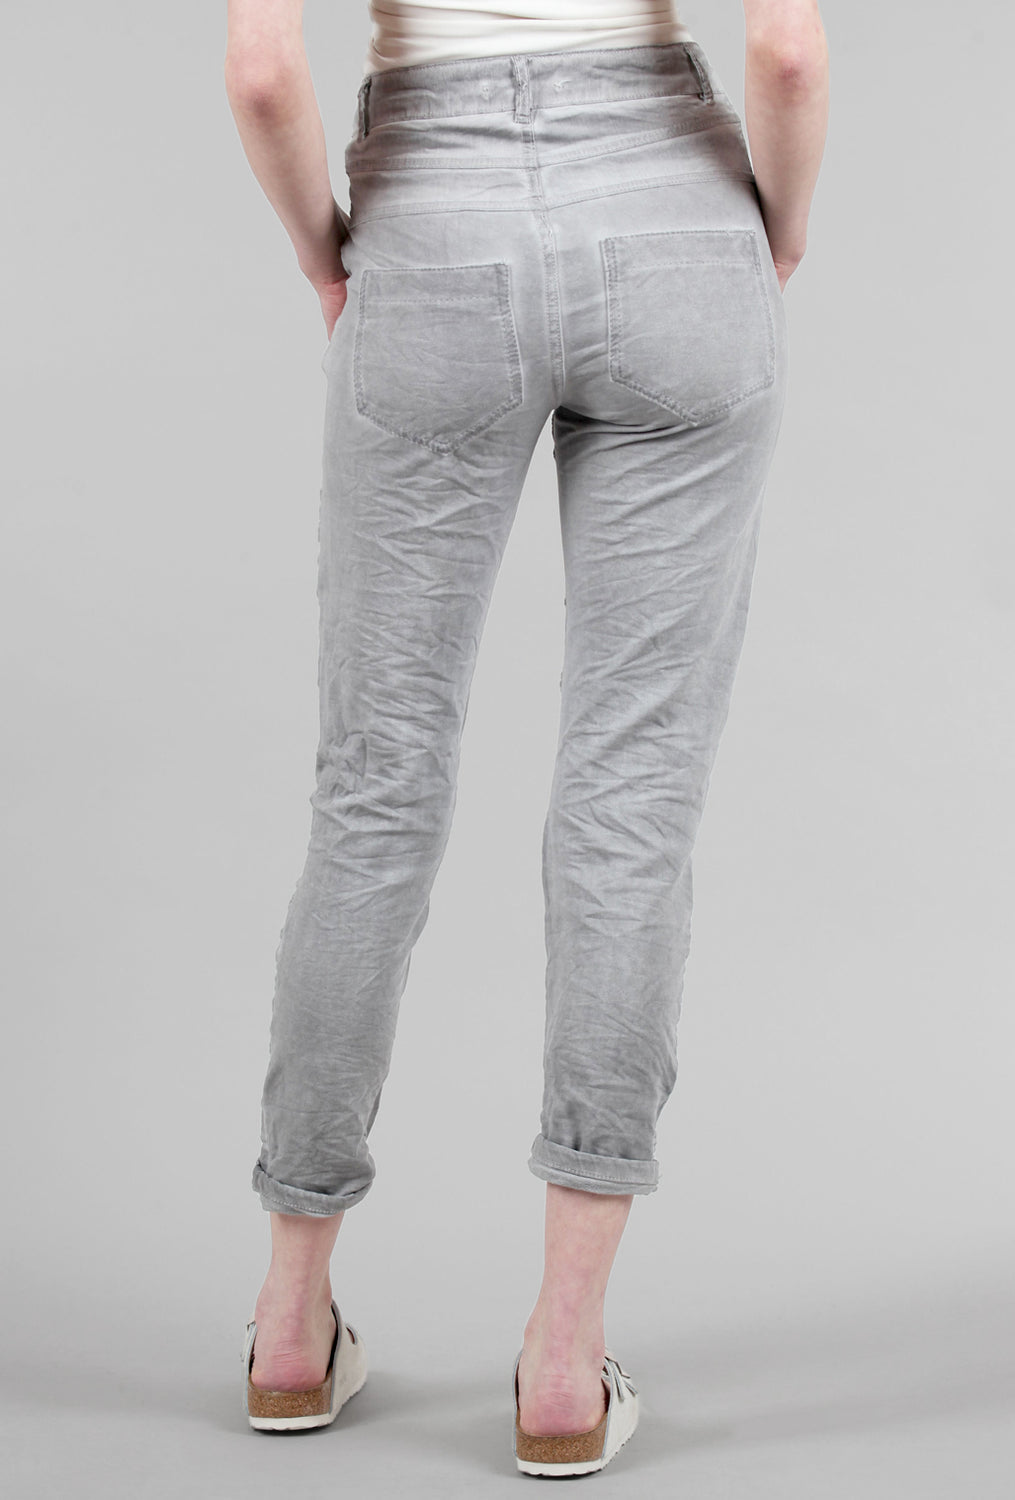 Four-Button Spring/Summer Pants, Gray Wash